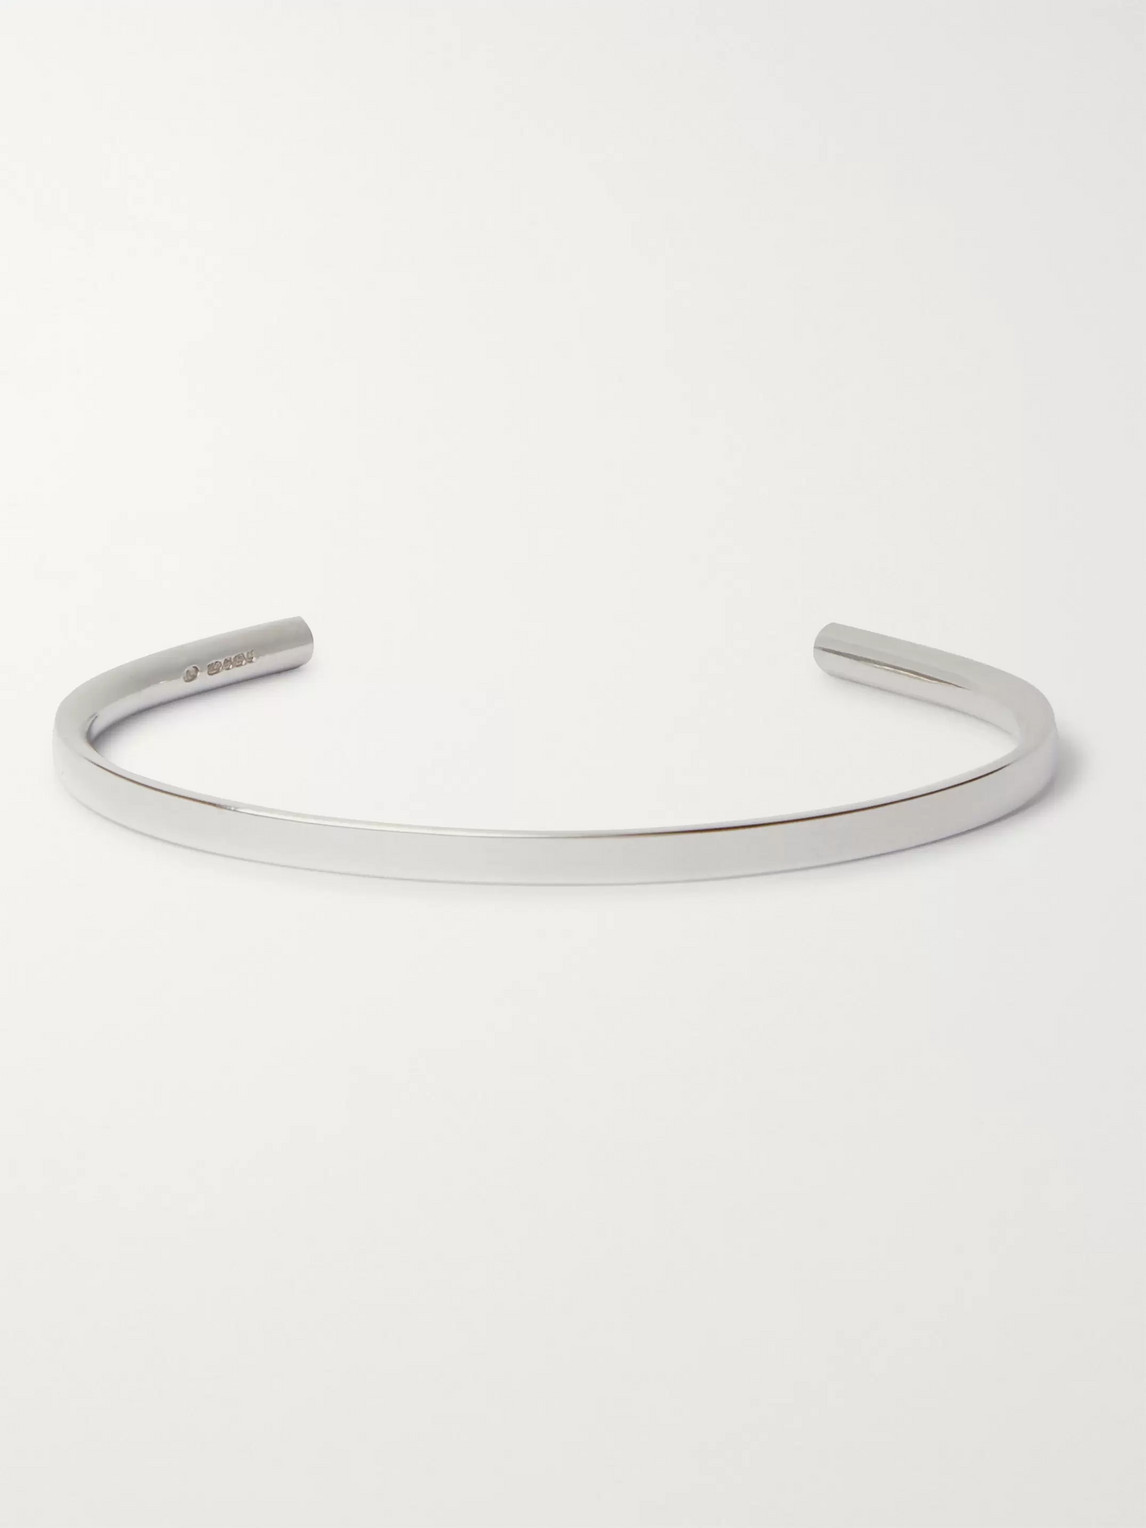 Alice Made This P4 Bancroft Sterling Silver Cuff